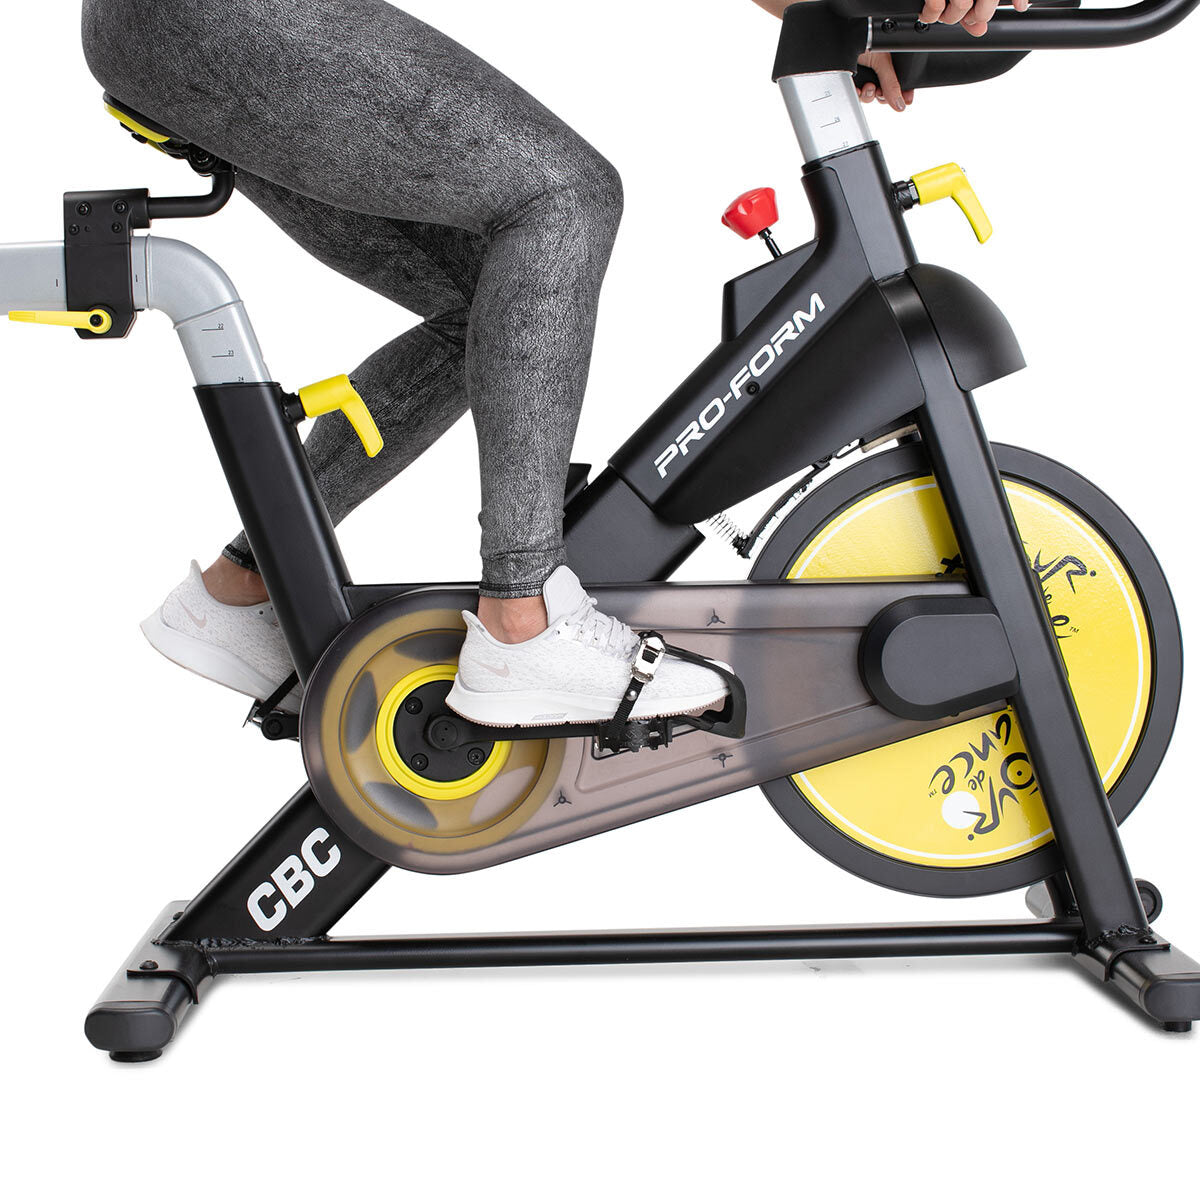 Installed ProForm Tour De France CBC Indoor Cycle with iFit Coach Subscription